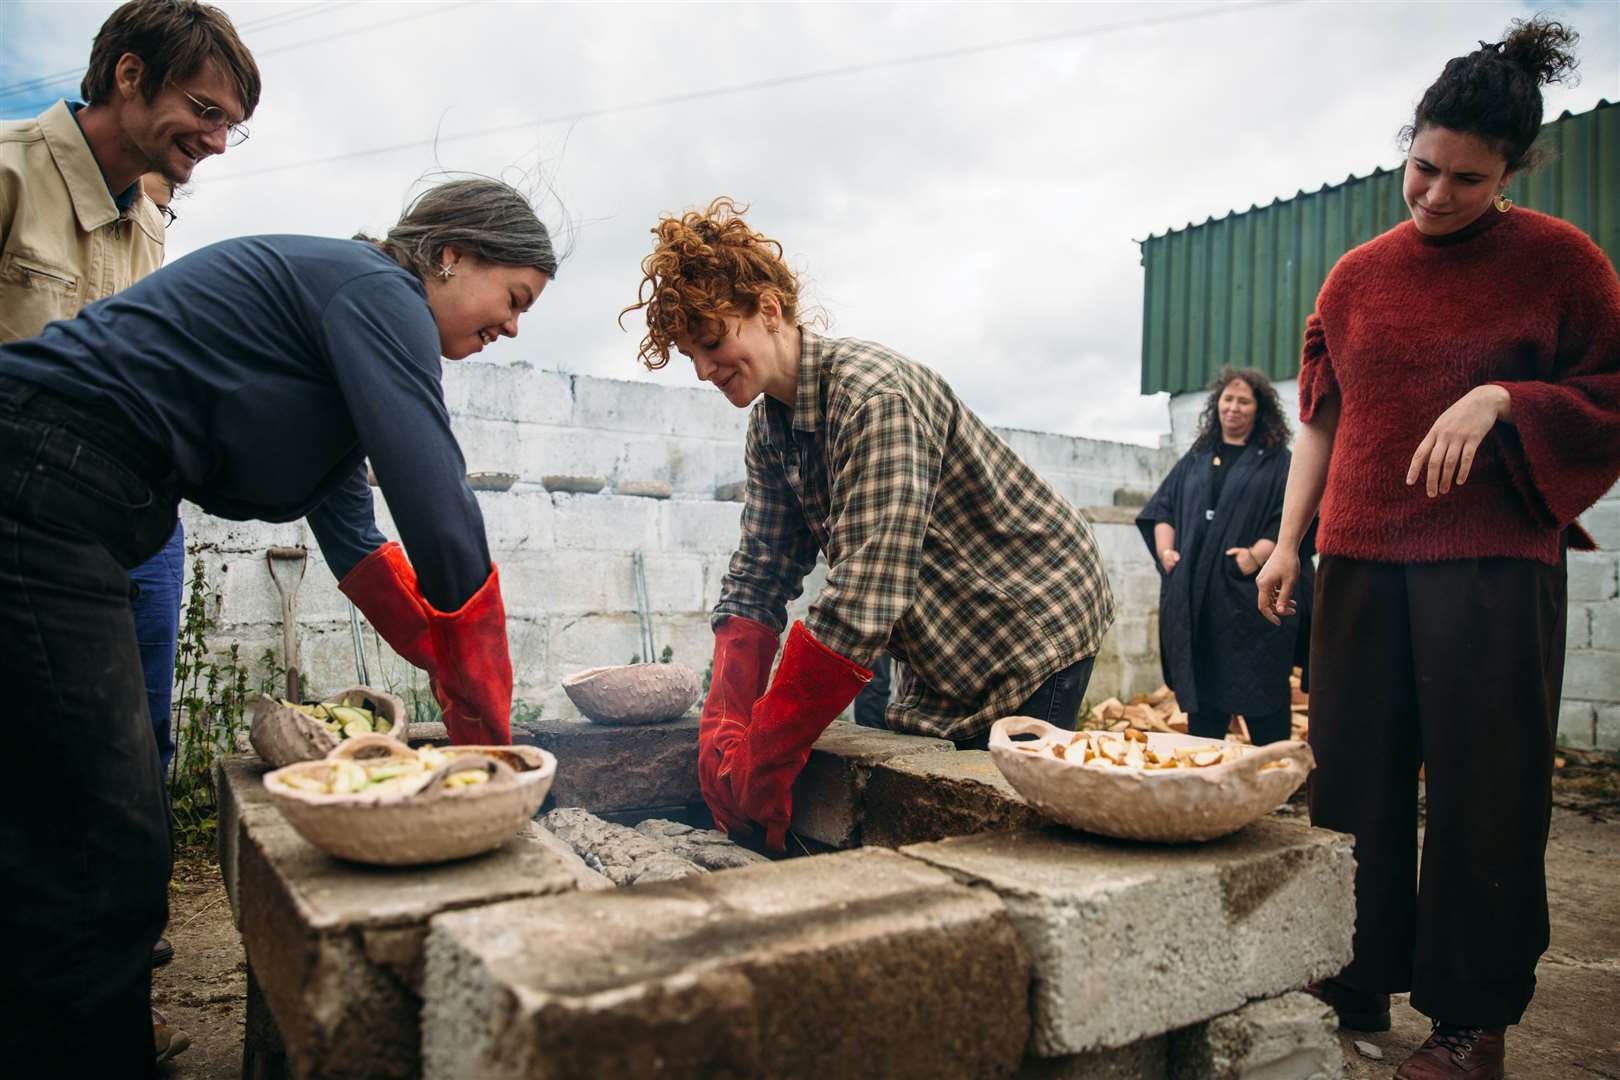 Artist Fionn Duffy and Misa Brzezicki of Deveron Projects lower clay covered brown trout into the outdoor oven...Picture: Jassy Earl